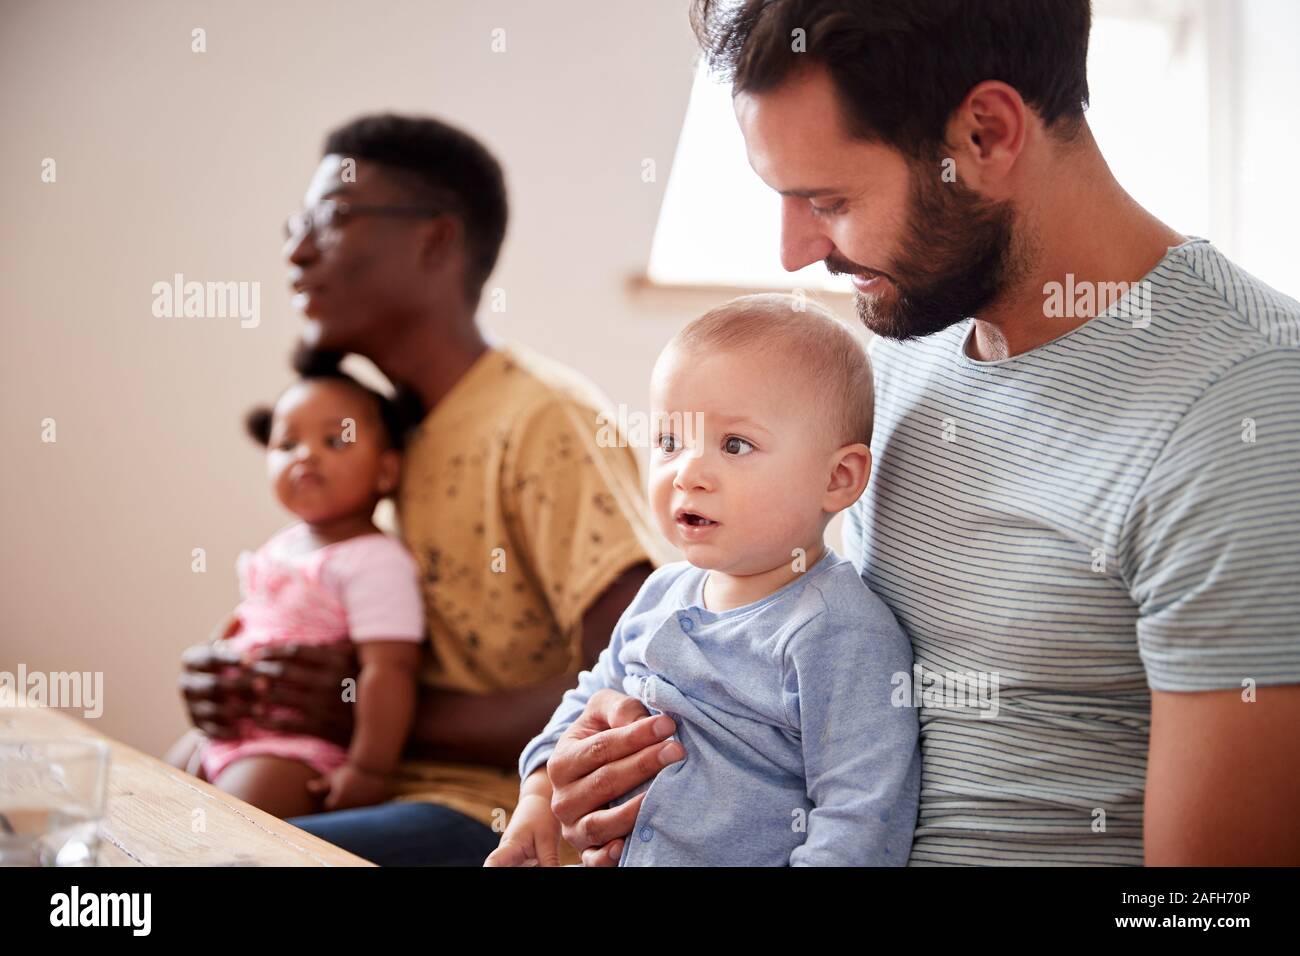 Two Families With Babies Meeting And Talking Around Table On Play Date Stock Photo